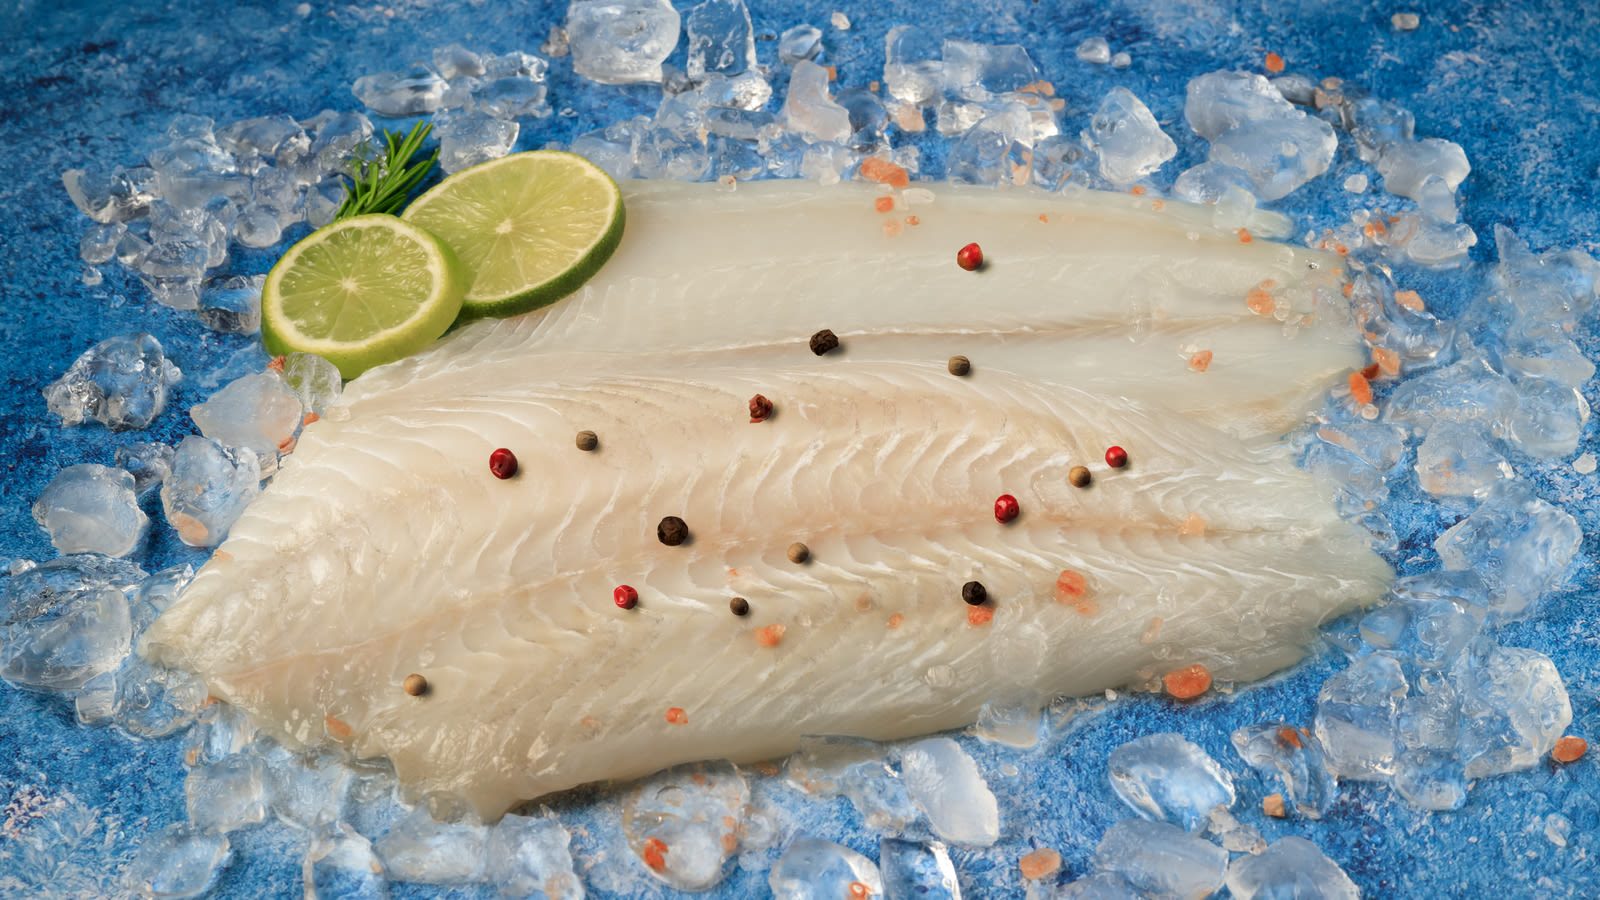 The Dangerous Fish Defrosting Mistake You'll Want To Avoid